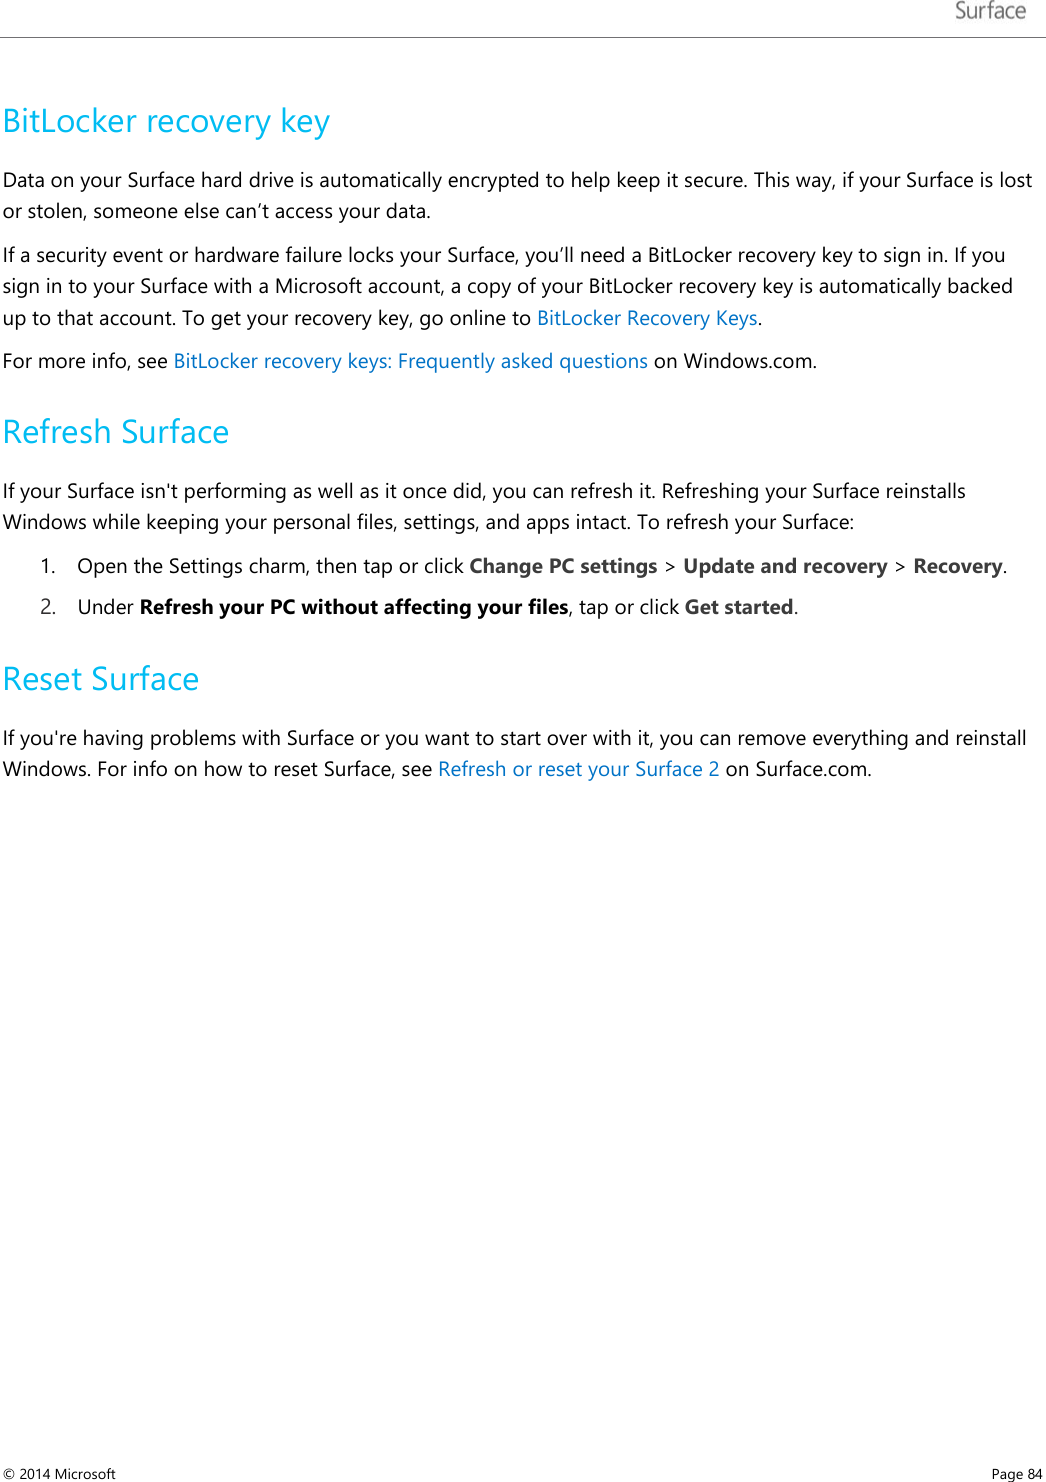   BitLocker recovery key Data on your Surface hard drive is automatically encrypted to help keep it secure. This way, if your Surface is lost or stolen, someone else can’t access your data.  If a security event or hardware failure locks your Surface, you’ll need a BitLocker recovery key to sign in. If you sign in to your Surface with a Microsoft account, a copy of your BitLocker recovery key is automatically backed up to that account. To get your recovery key, go online to BitLocker Recovery Keys.  For more info, see BitLocker recovery keys: Frequently asked questions on Windows.com. Refresh Surface If your Surface isn&apos;t performing as well as it once did, you can refresh it. Refreshing your Surface reinstalls Windows while keeping your personal files, settings, and apps intact. To refresh your Surface: 1. Open the Settings charm, then tap or click Change PC settings &gt; Update and recovery &gt; Recovery.  2. Under Refresh your PC without affecting your files, tap or click Get started.  Reset Surface  If you&apos;re having problems with Surface or you want to start over with it, you can remove everything and reinstall Windows. For info on how to reset Surface, see Refresh or reset your Surface 2 on Surface.com.   © 2014 Microsoft     Page 84  